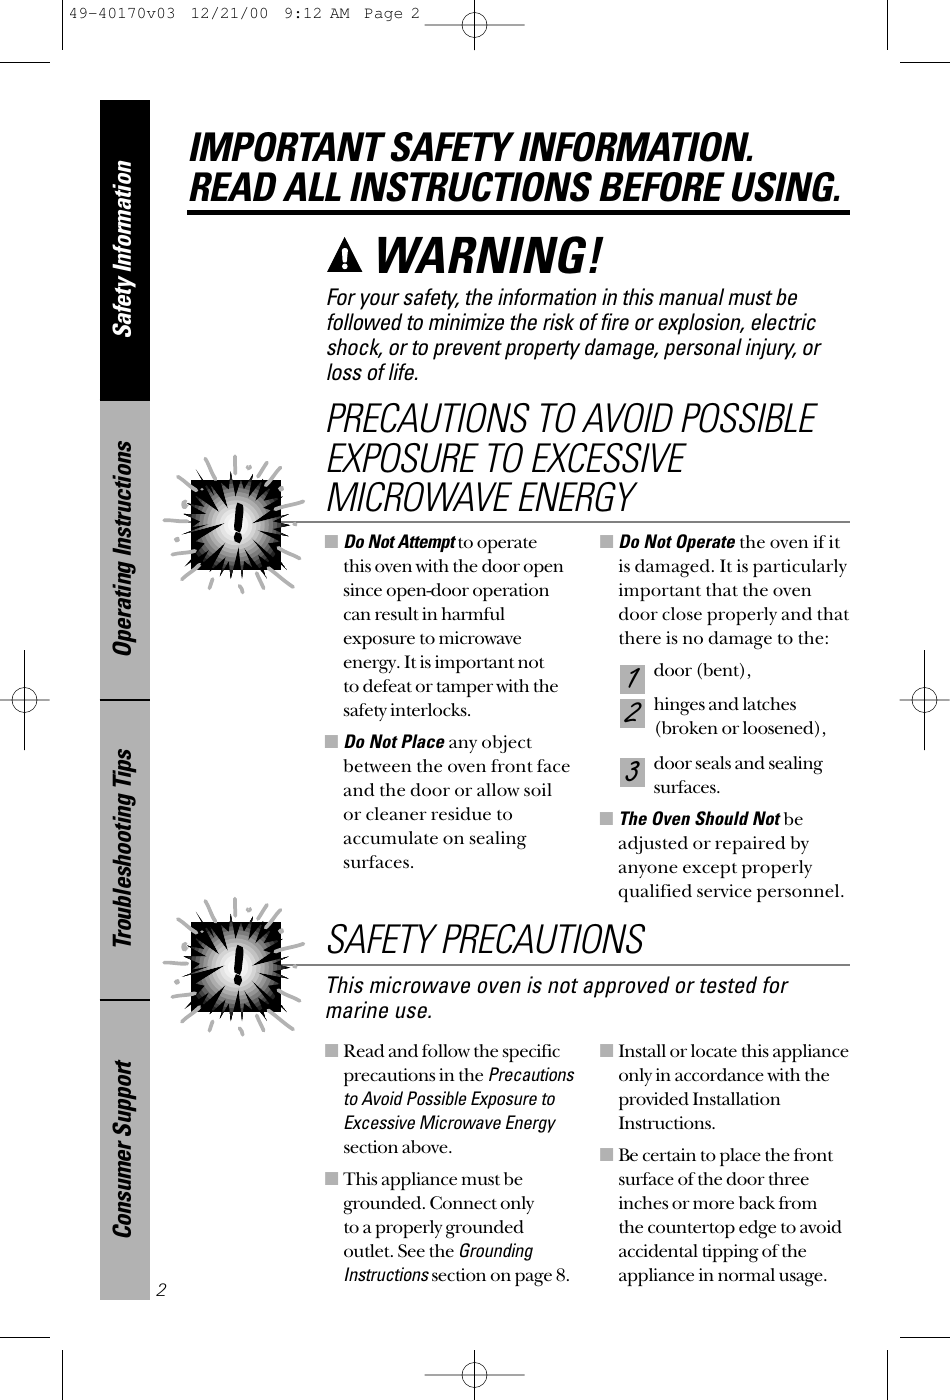 ■Read and follow the specificprecautions in the Precautionsto Avoid Possible Exposure toExcessive Microwave Energysection above.■This appliance must begrounded. Connect only to a properly groundedoutlet. See the GroundingInstructionssection on page 8.■Install or locate this applianceonly in accordance with theprovided InstallationInstructions.■Be certain to place the frontsurface of the door threeinches or more back from the countertop edge to avoidaccidental tipping of theappliance in normal usage.■Do Not Attemptto operate this oven with the door opensince open-door operationcan result in harmfulexposure to microwaveenergy. It is important not to defeat or tamper with thesafety interlocks.■Do Not Place any objectbetween the oven front faceand the door or allow soilor cleaner residue toaccumulate on sealingsurfaces.■Do Not Operate the oven if itis damaged. It is particularlyimportant that the ovendoor close properly and thatthere is no damage to the:door (bent),hinges and latches (broken or loosened),door seals and sealingsurfaces.■The Oven Should Not beadjusted or repaired byanyone except properlyqualified service personnel.321PRECAUTIONS TO AVOID POSSIBLEEXPOSURE TO EXCESSIVEMICROWAVE ENERGYSafety InformationOperating InstructionsTroubleshooting TipsConsumer SupportIMPORTANT SAFETY INFORMATION.READ ALL INSTRUCTIONS BEFORE USING.2For your safety, the information in this manual must befollowed to minimize the risk of fire or explosion, electricshock, or to prevent property damage, personal injury, or loss of life.WARNING! This microwave oven is not approved or tested formarine use.SAFETY PRECAUTIONS49-40170v03  12/21/00  9:12 AM  Page 2